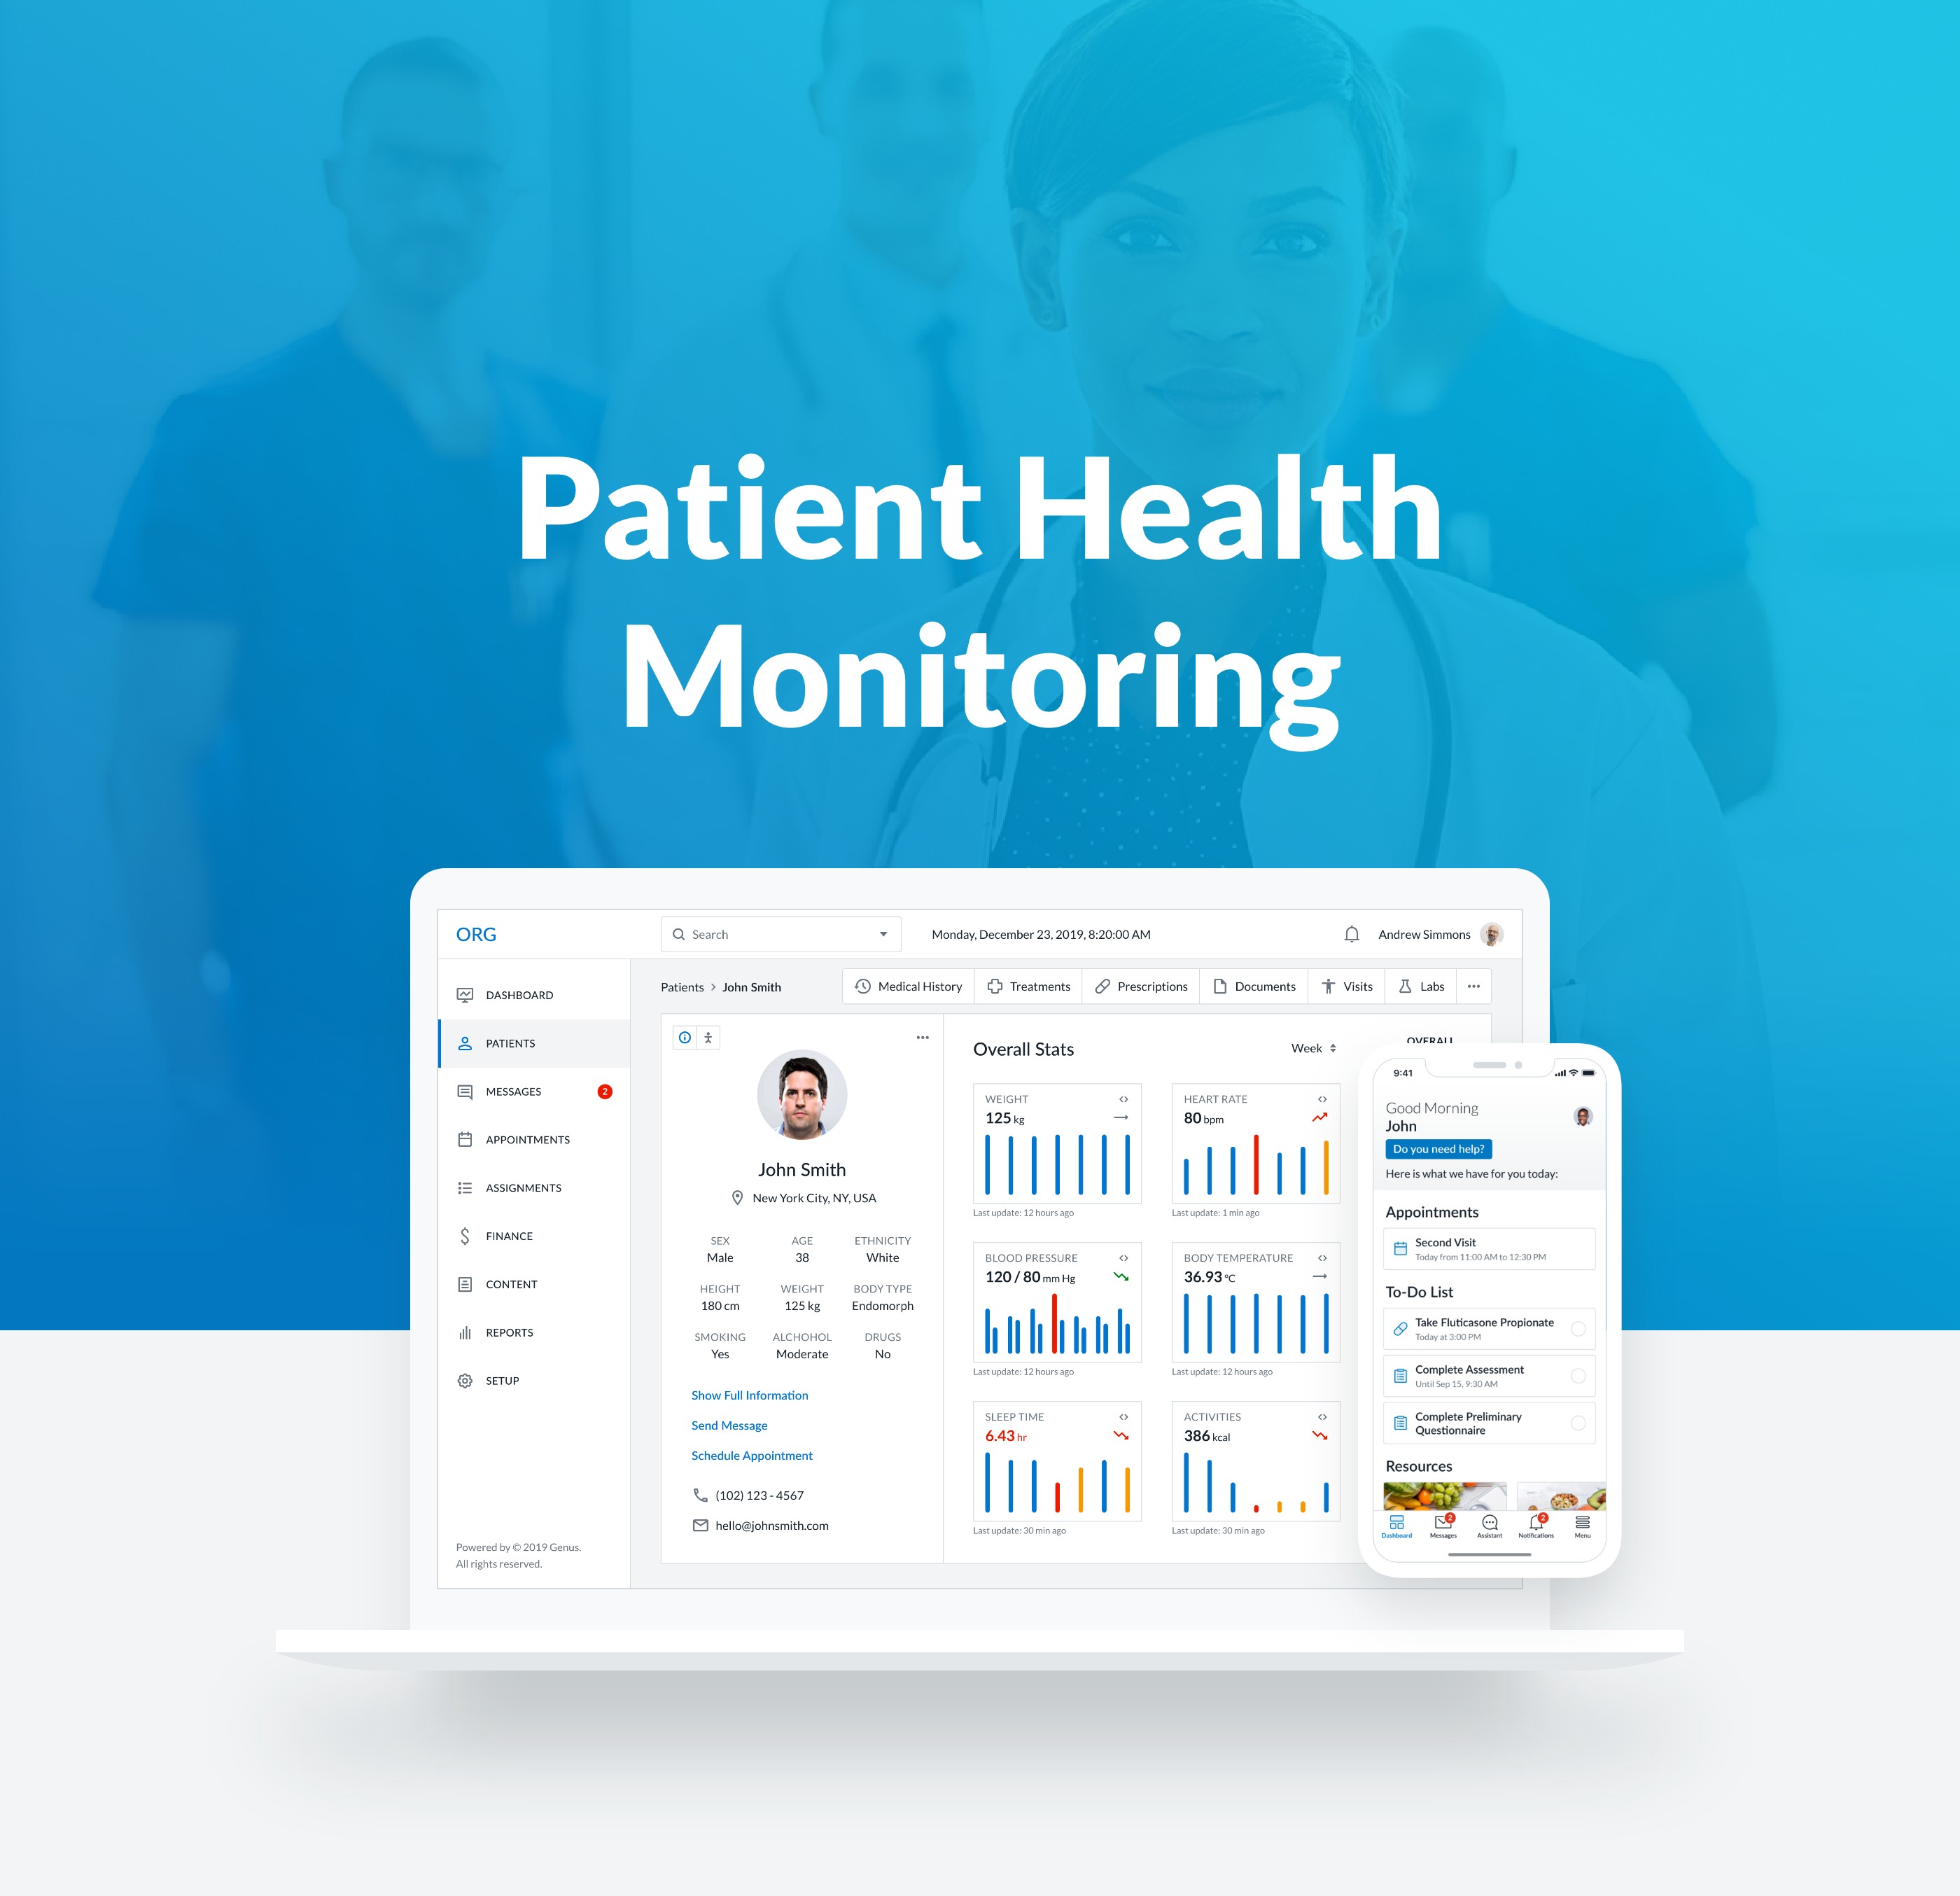 Patient Health Monitoring Platform Uiux Design For Mobile And Web Apps